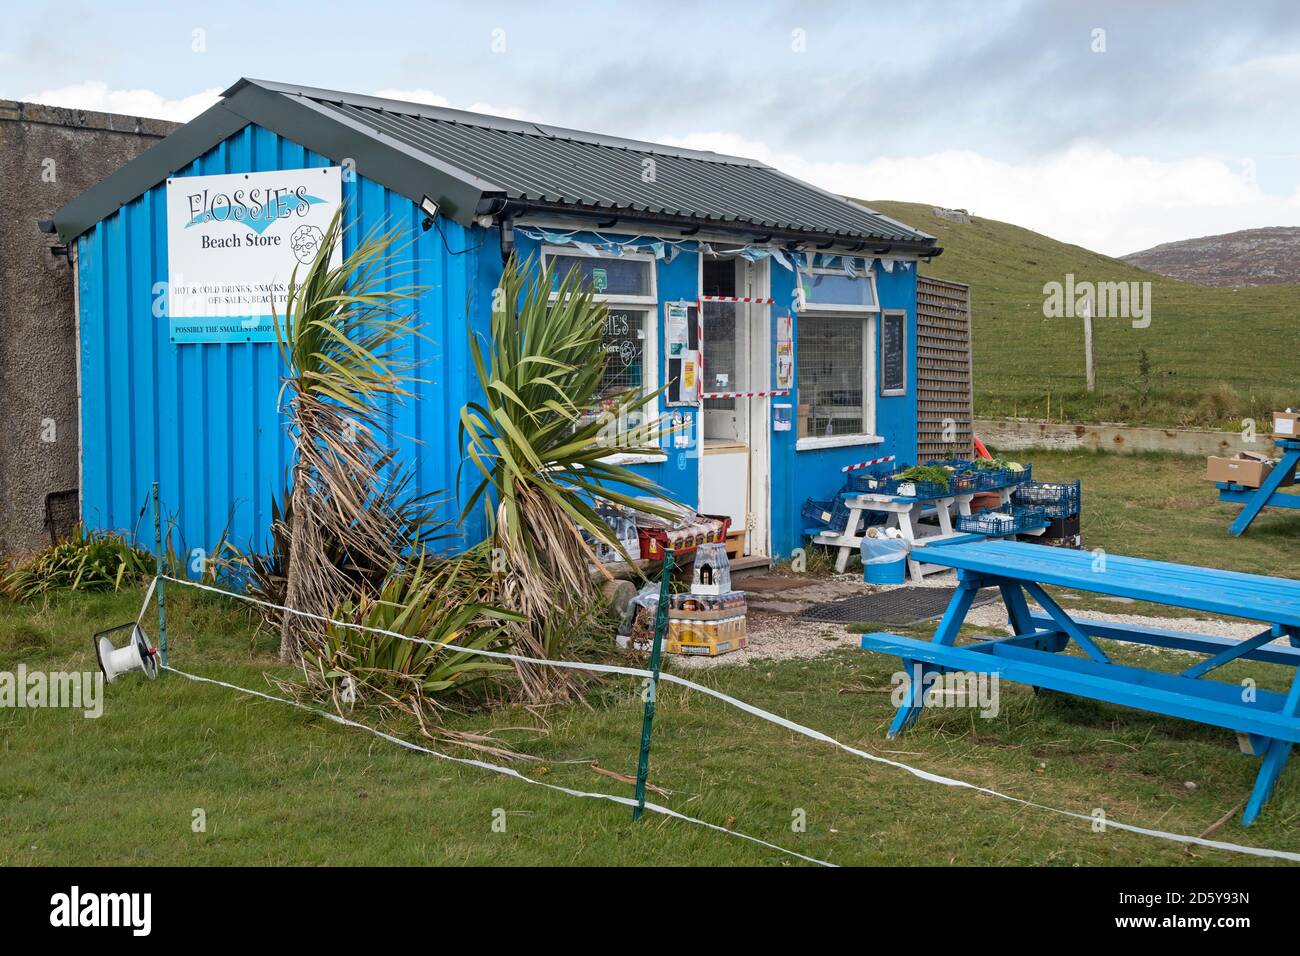 Flossie’s Beach Store During the Covid 19 Pandemic, a Popular Little Shop in Small Crofting Community of Clachtoll, Assynt, NW Highlands, Scotland, UK Stock Photo